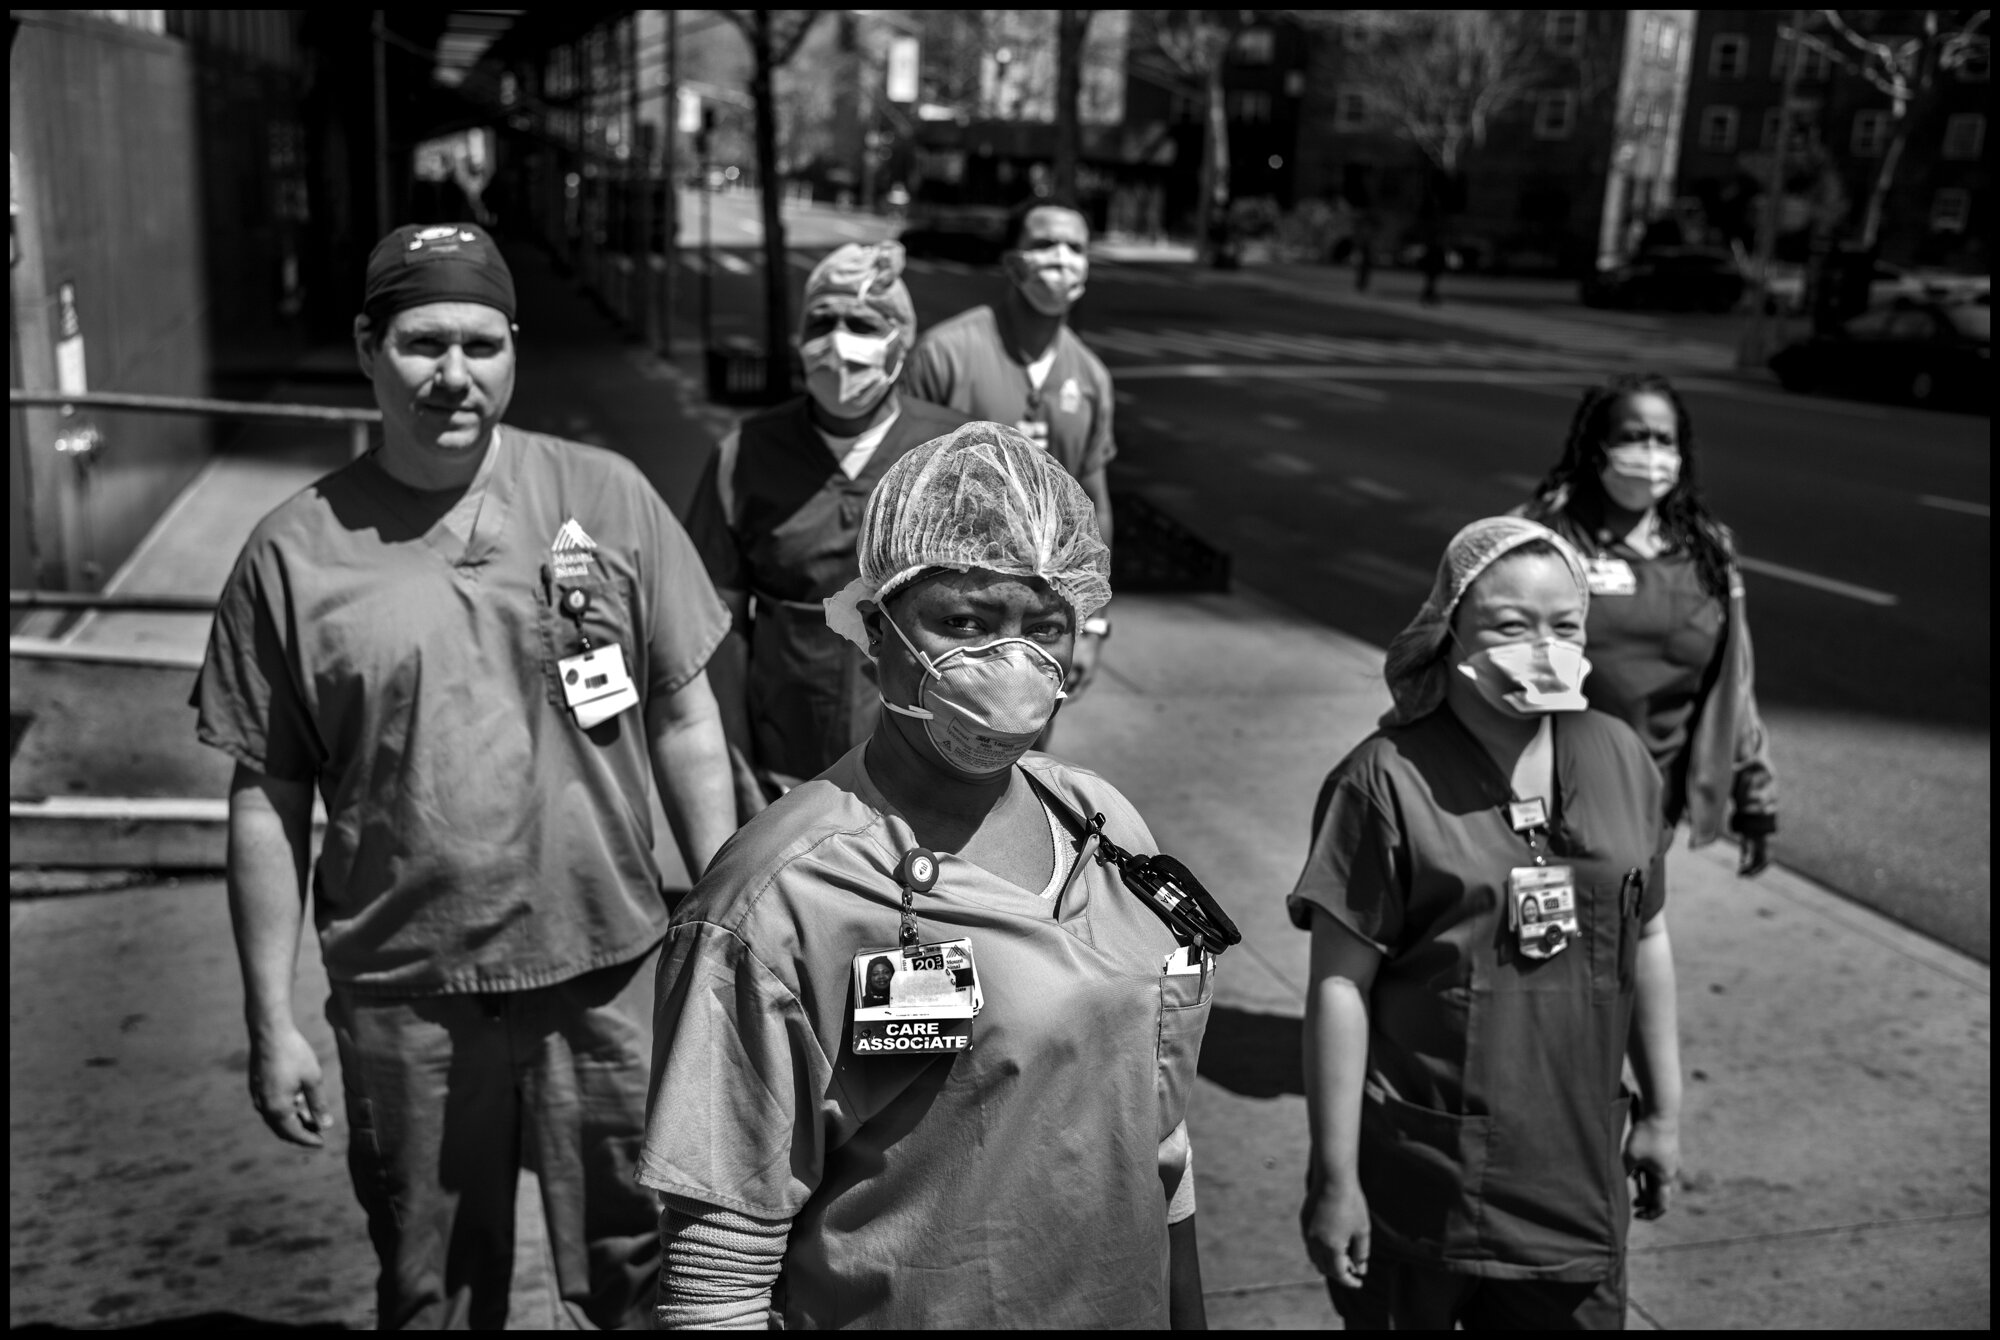  Cleo, Clara, Mariana, Richard and Mike are all are healthcare workers at Mount Sinai Hospital currently working with Covid-19 patients. One commented “it is a very scary-sad situation”.   April 19, 2020. © Peter Turnley  ID# 26-003 